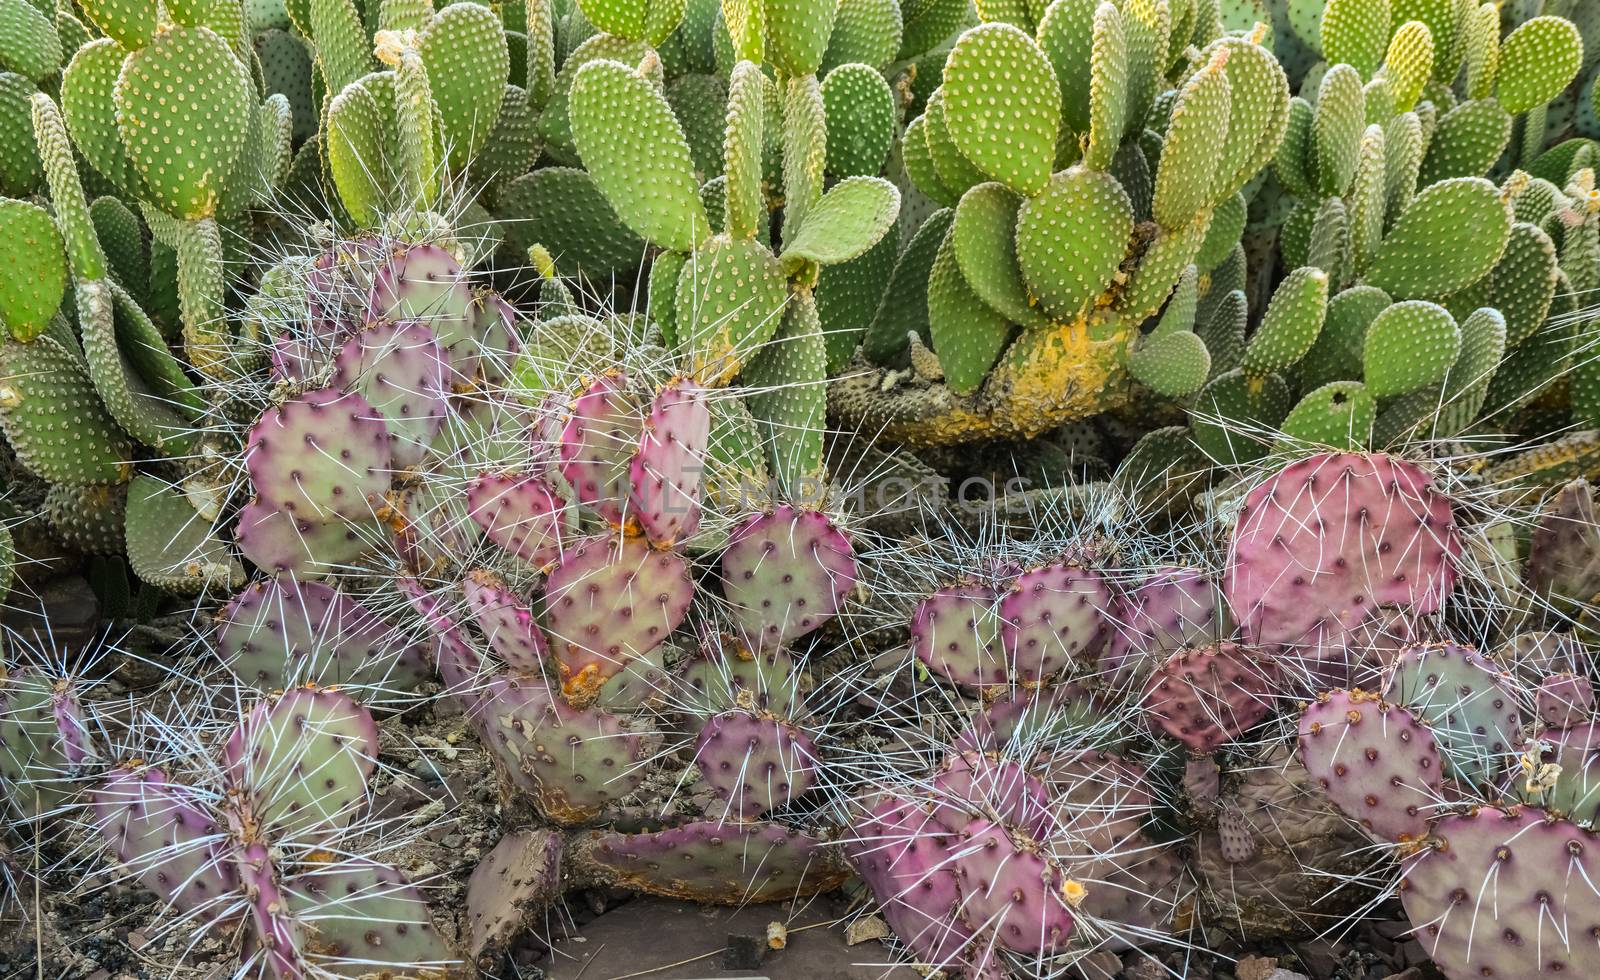 A group of succulent plants of Opuntia cacti in the Phoenix Bota by Hydrobiolog